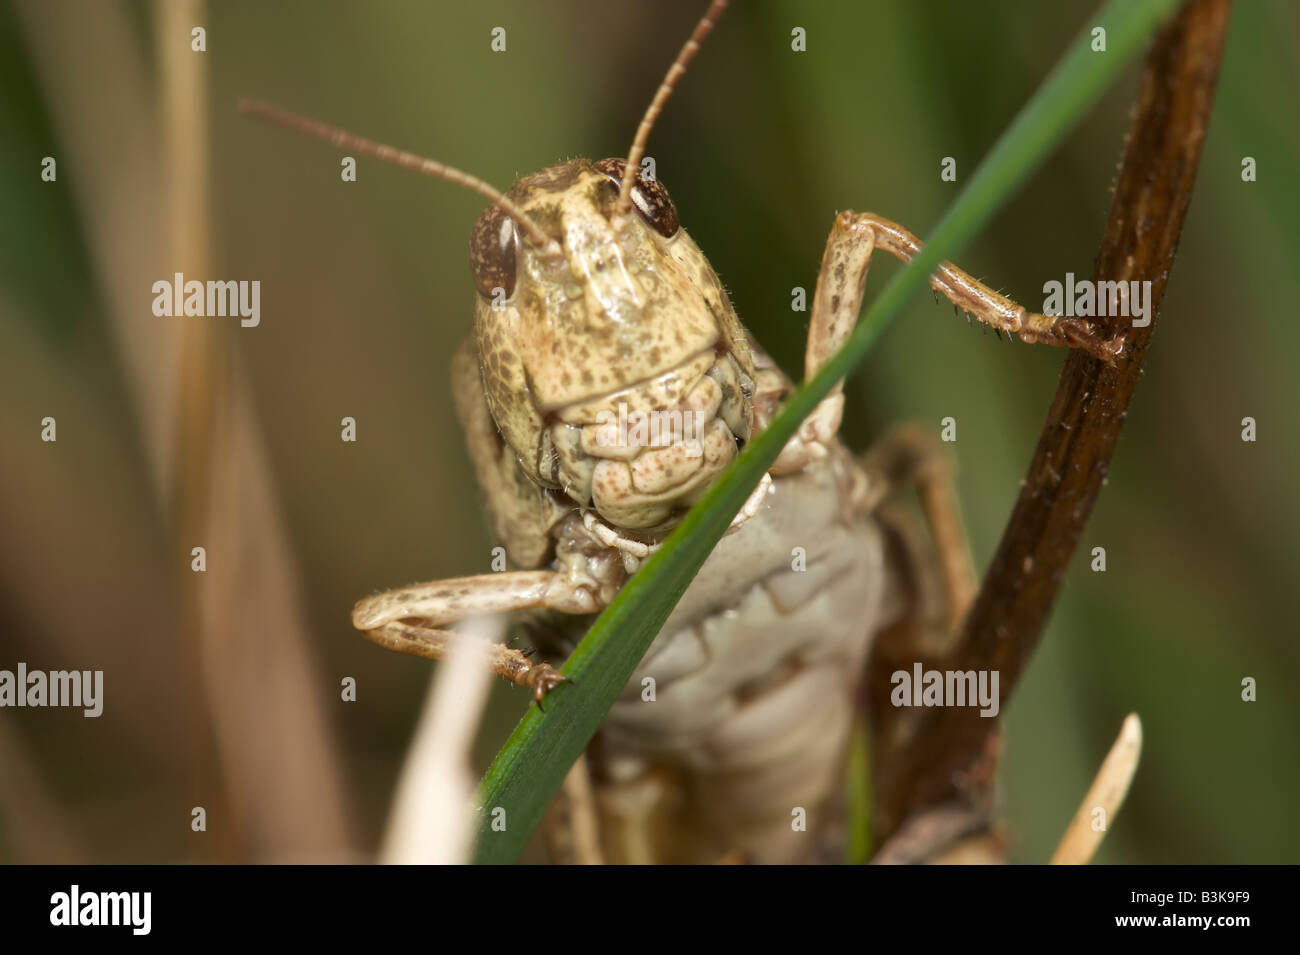 A portrait of a little grasshopper as it holds onto a blade of grass. Stock Photo